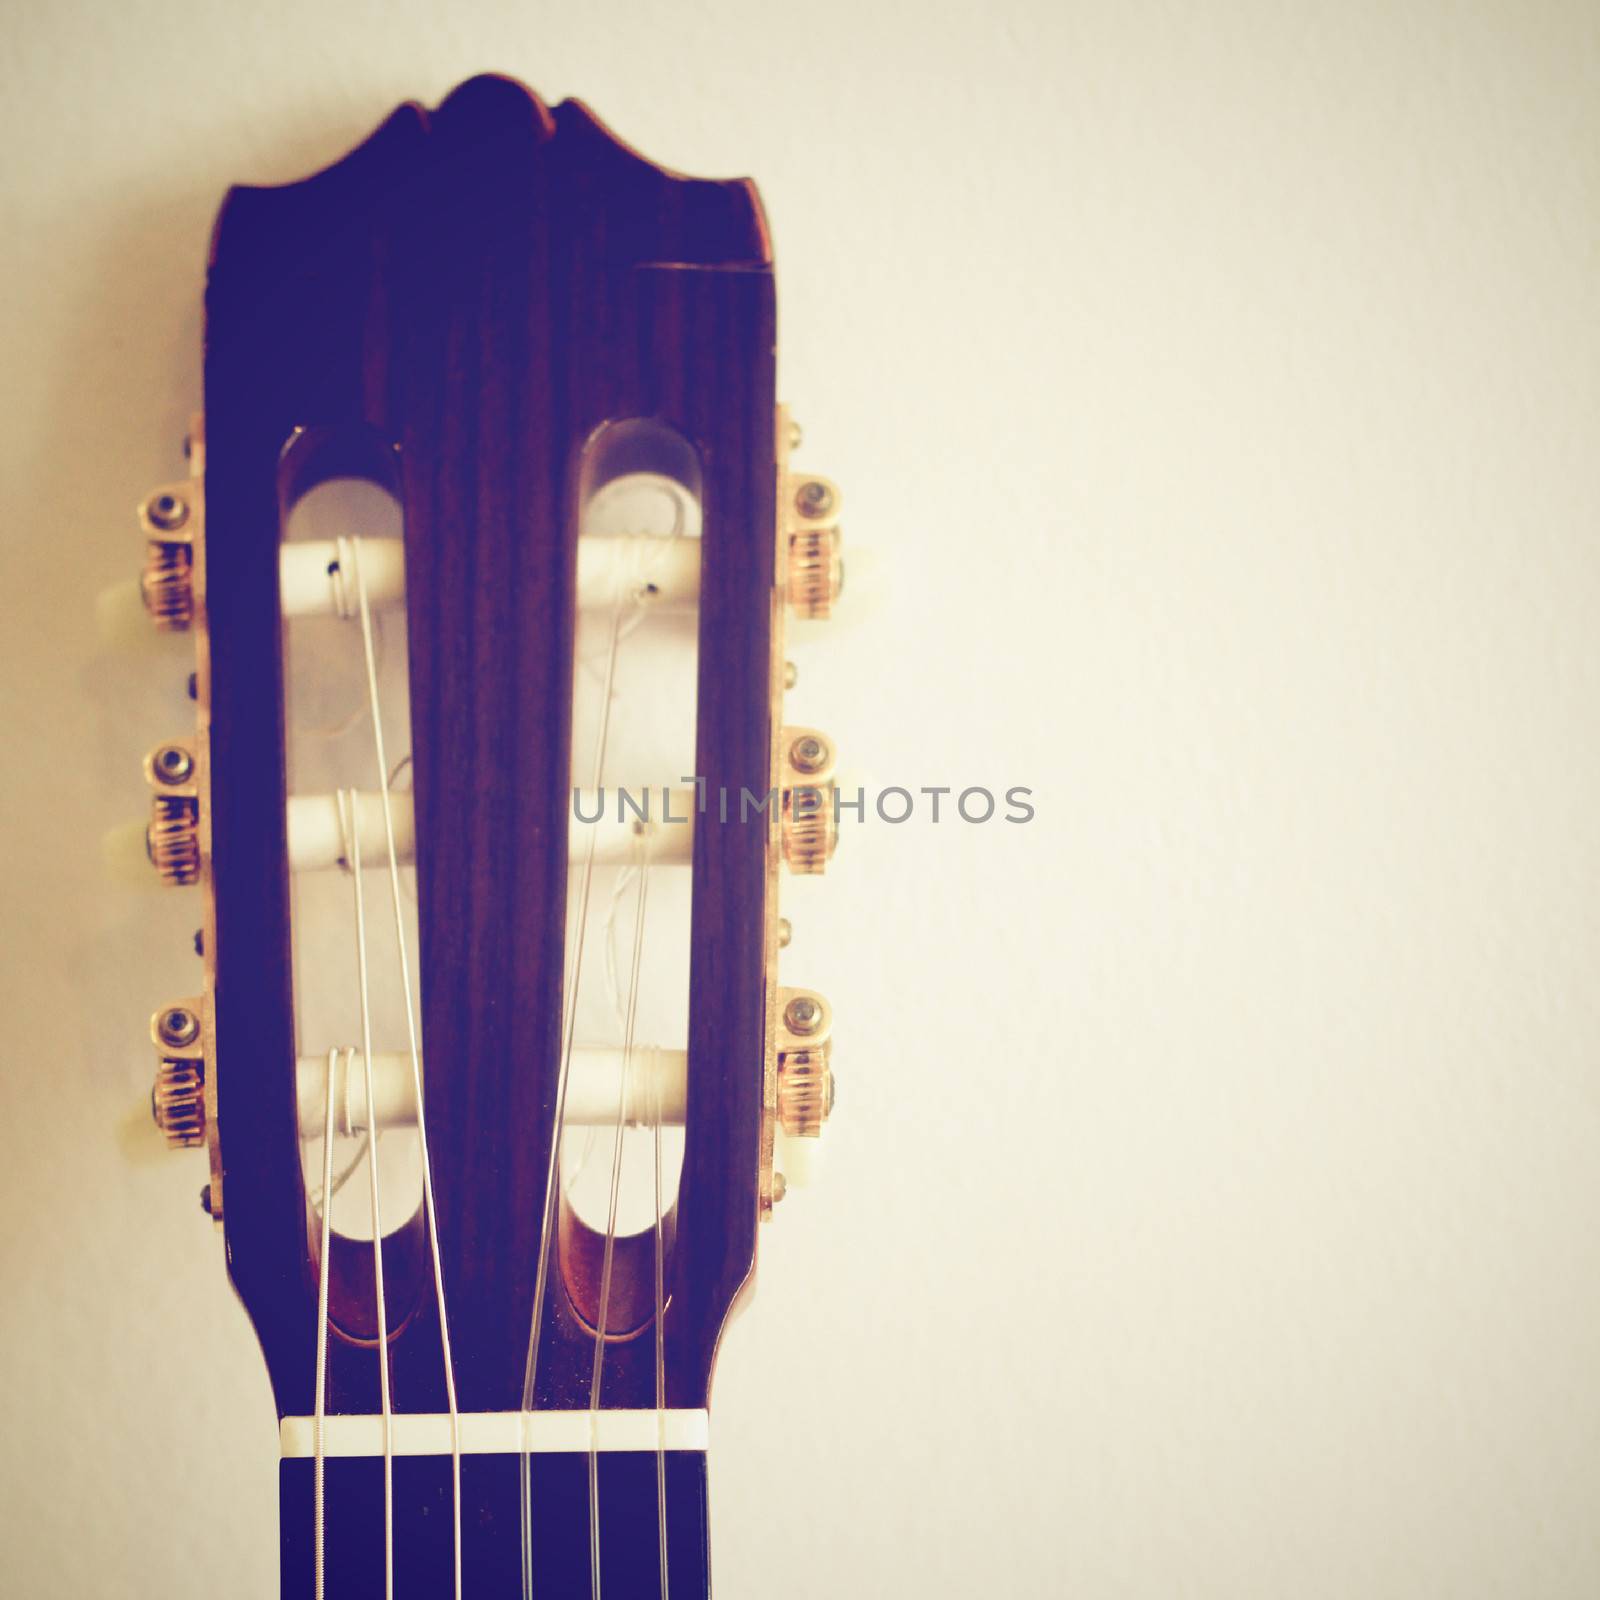 Classical guitar head with retro filter effect